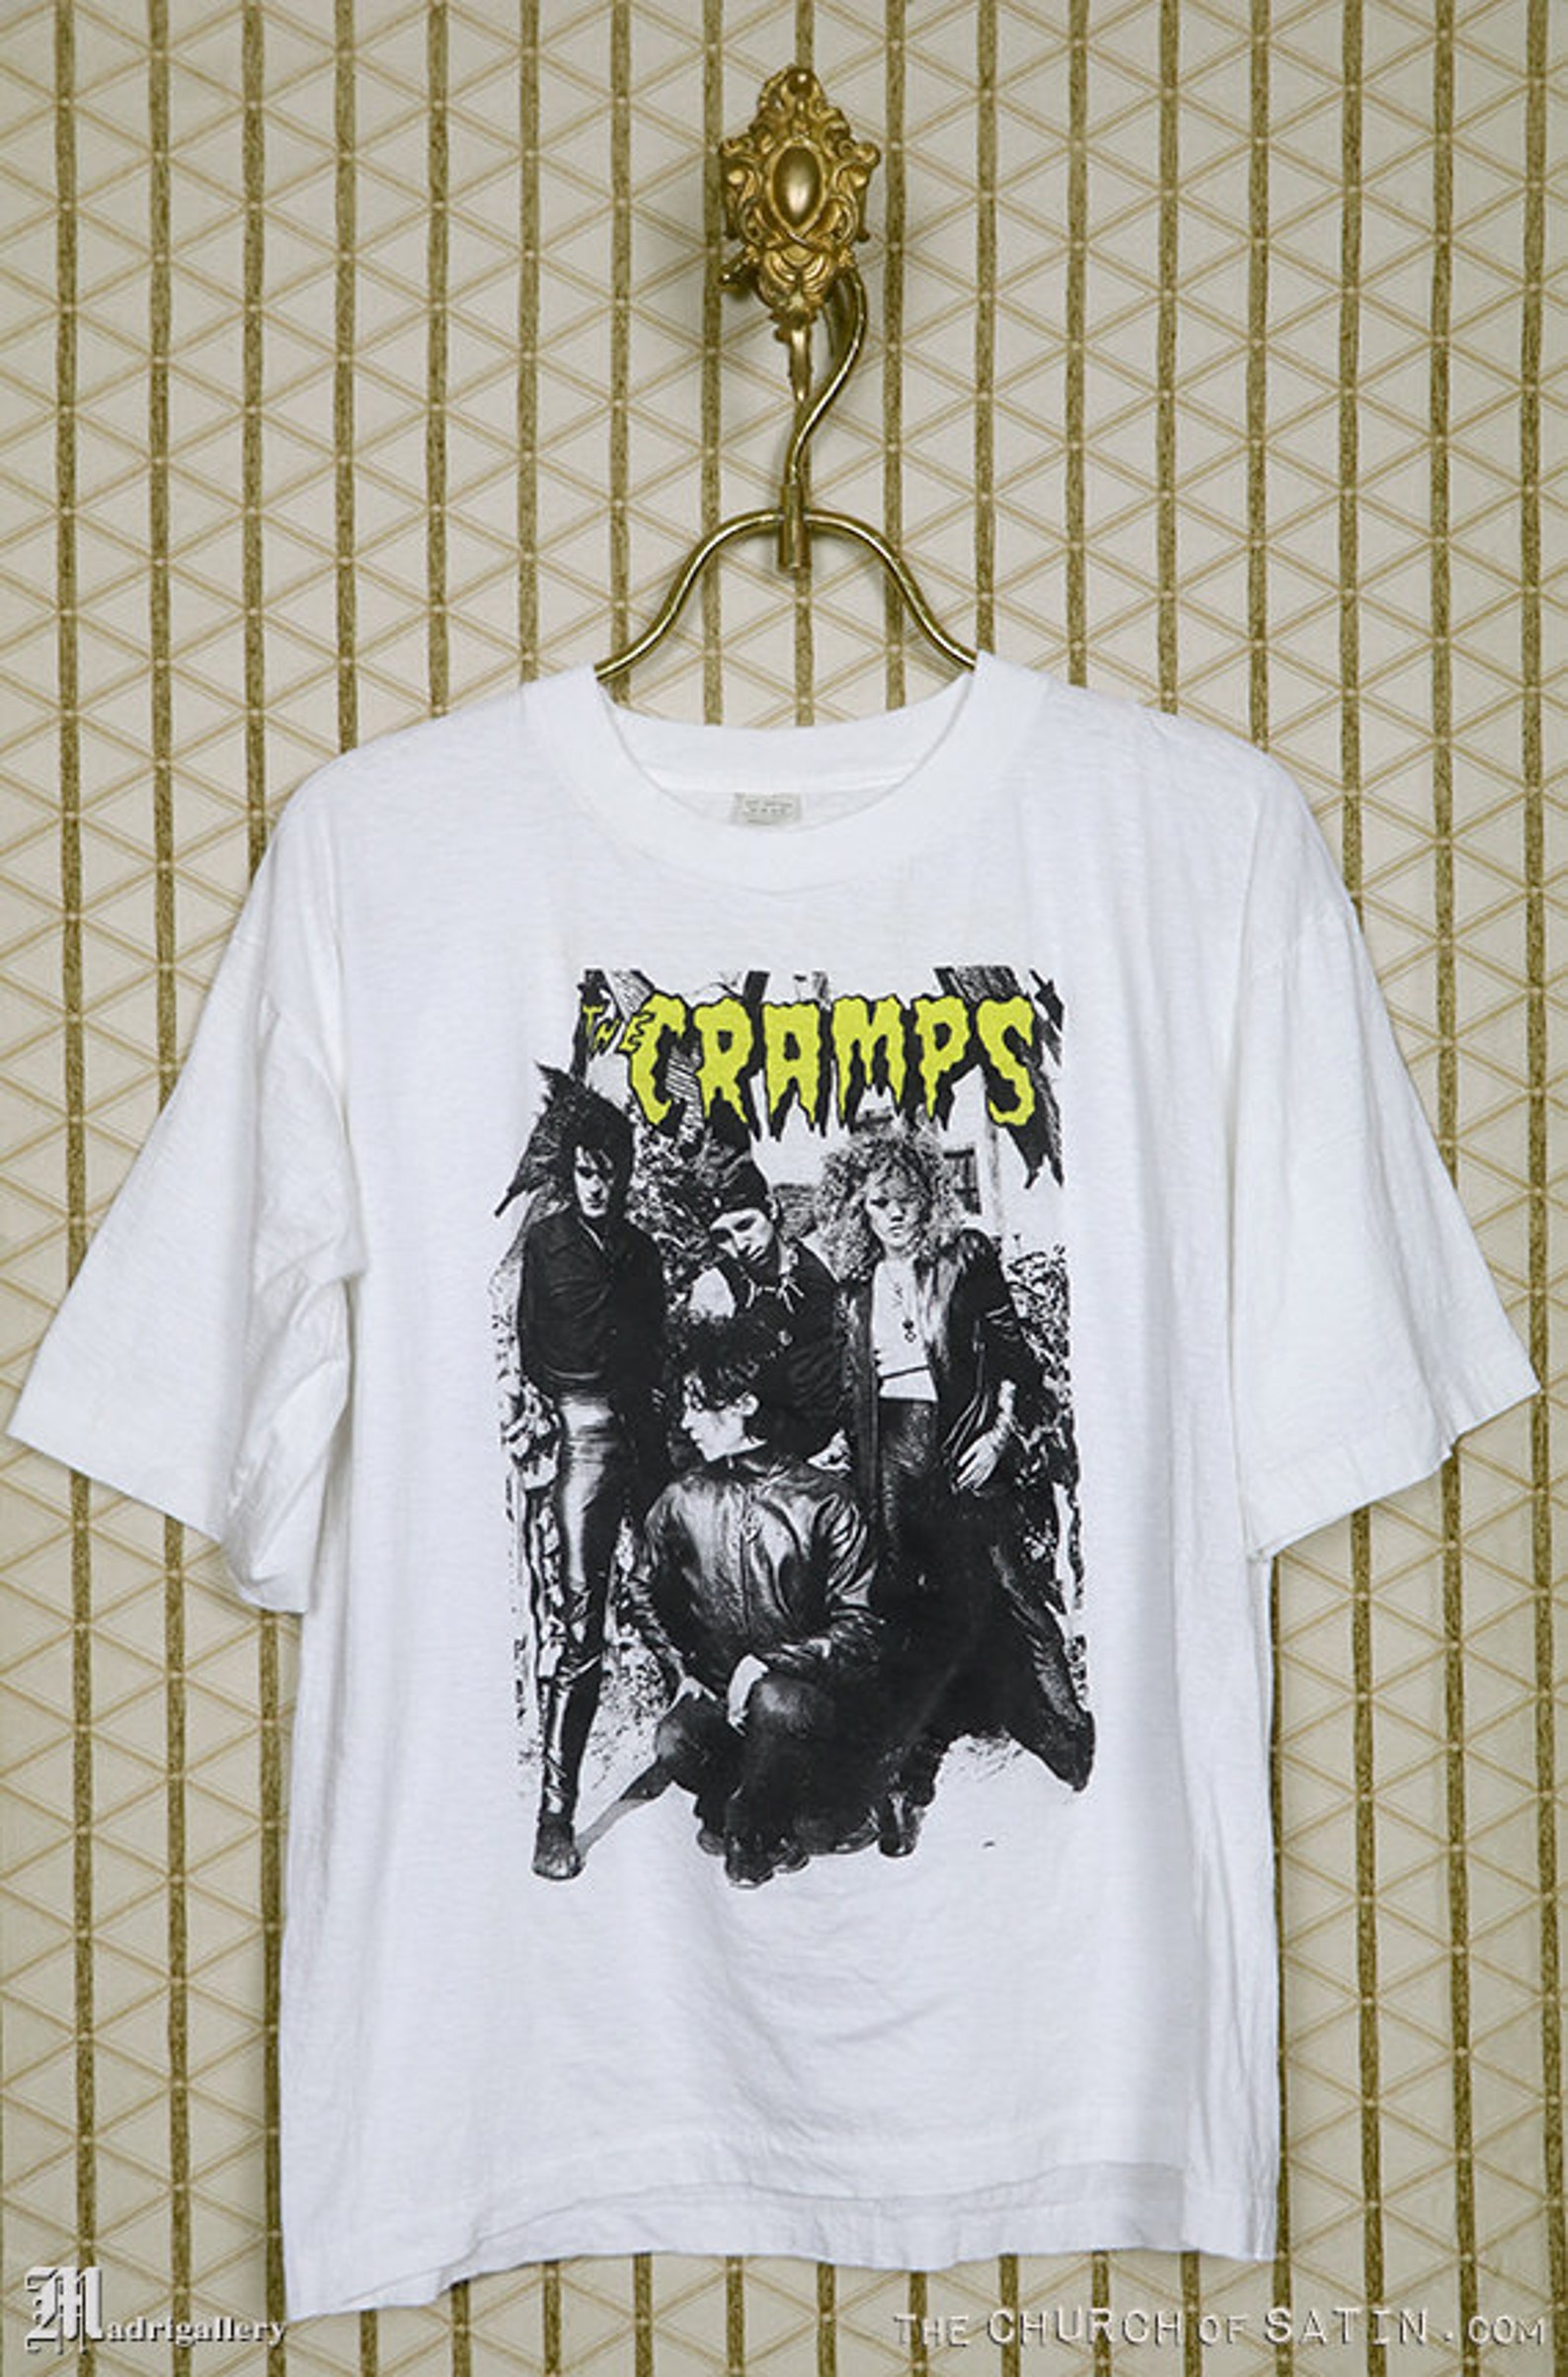 The Cramps t-shirt soft white tee shirt vintage rare Lux | Etsy